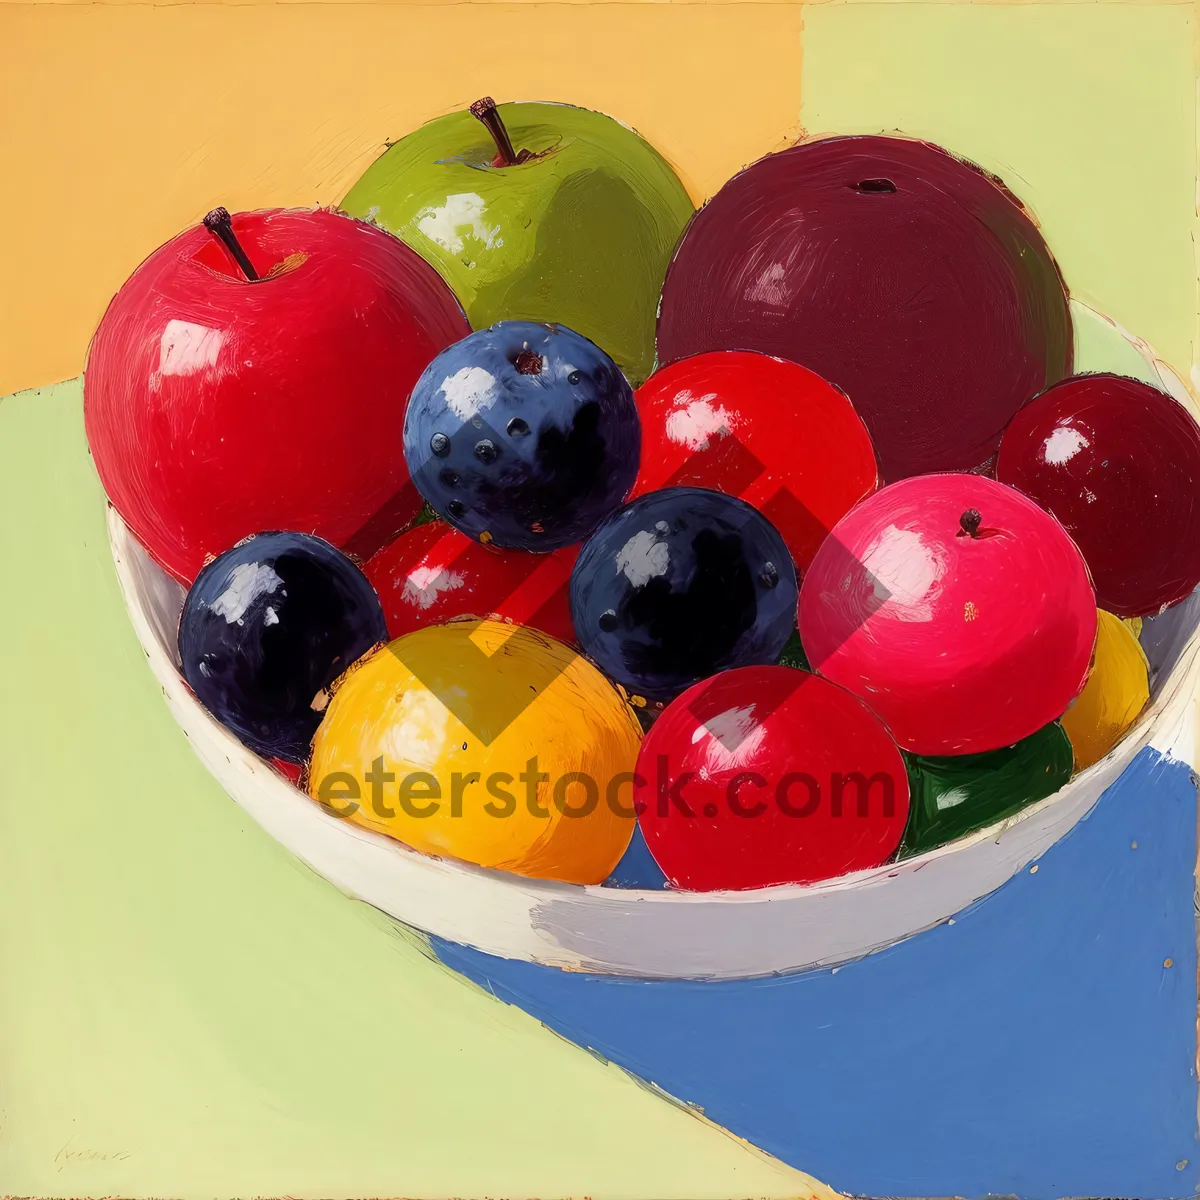 Picture of Fruity Billiards Fun: Colorful, Raisin Red Currant Round